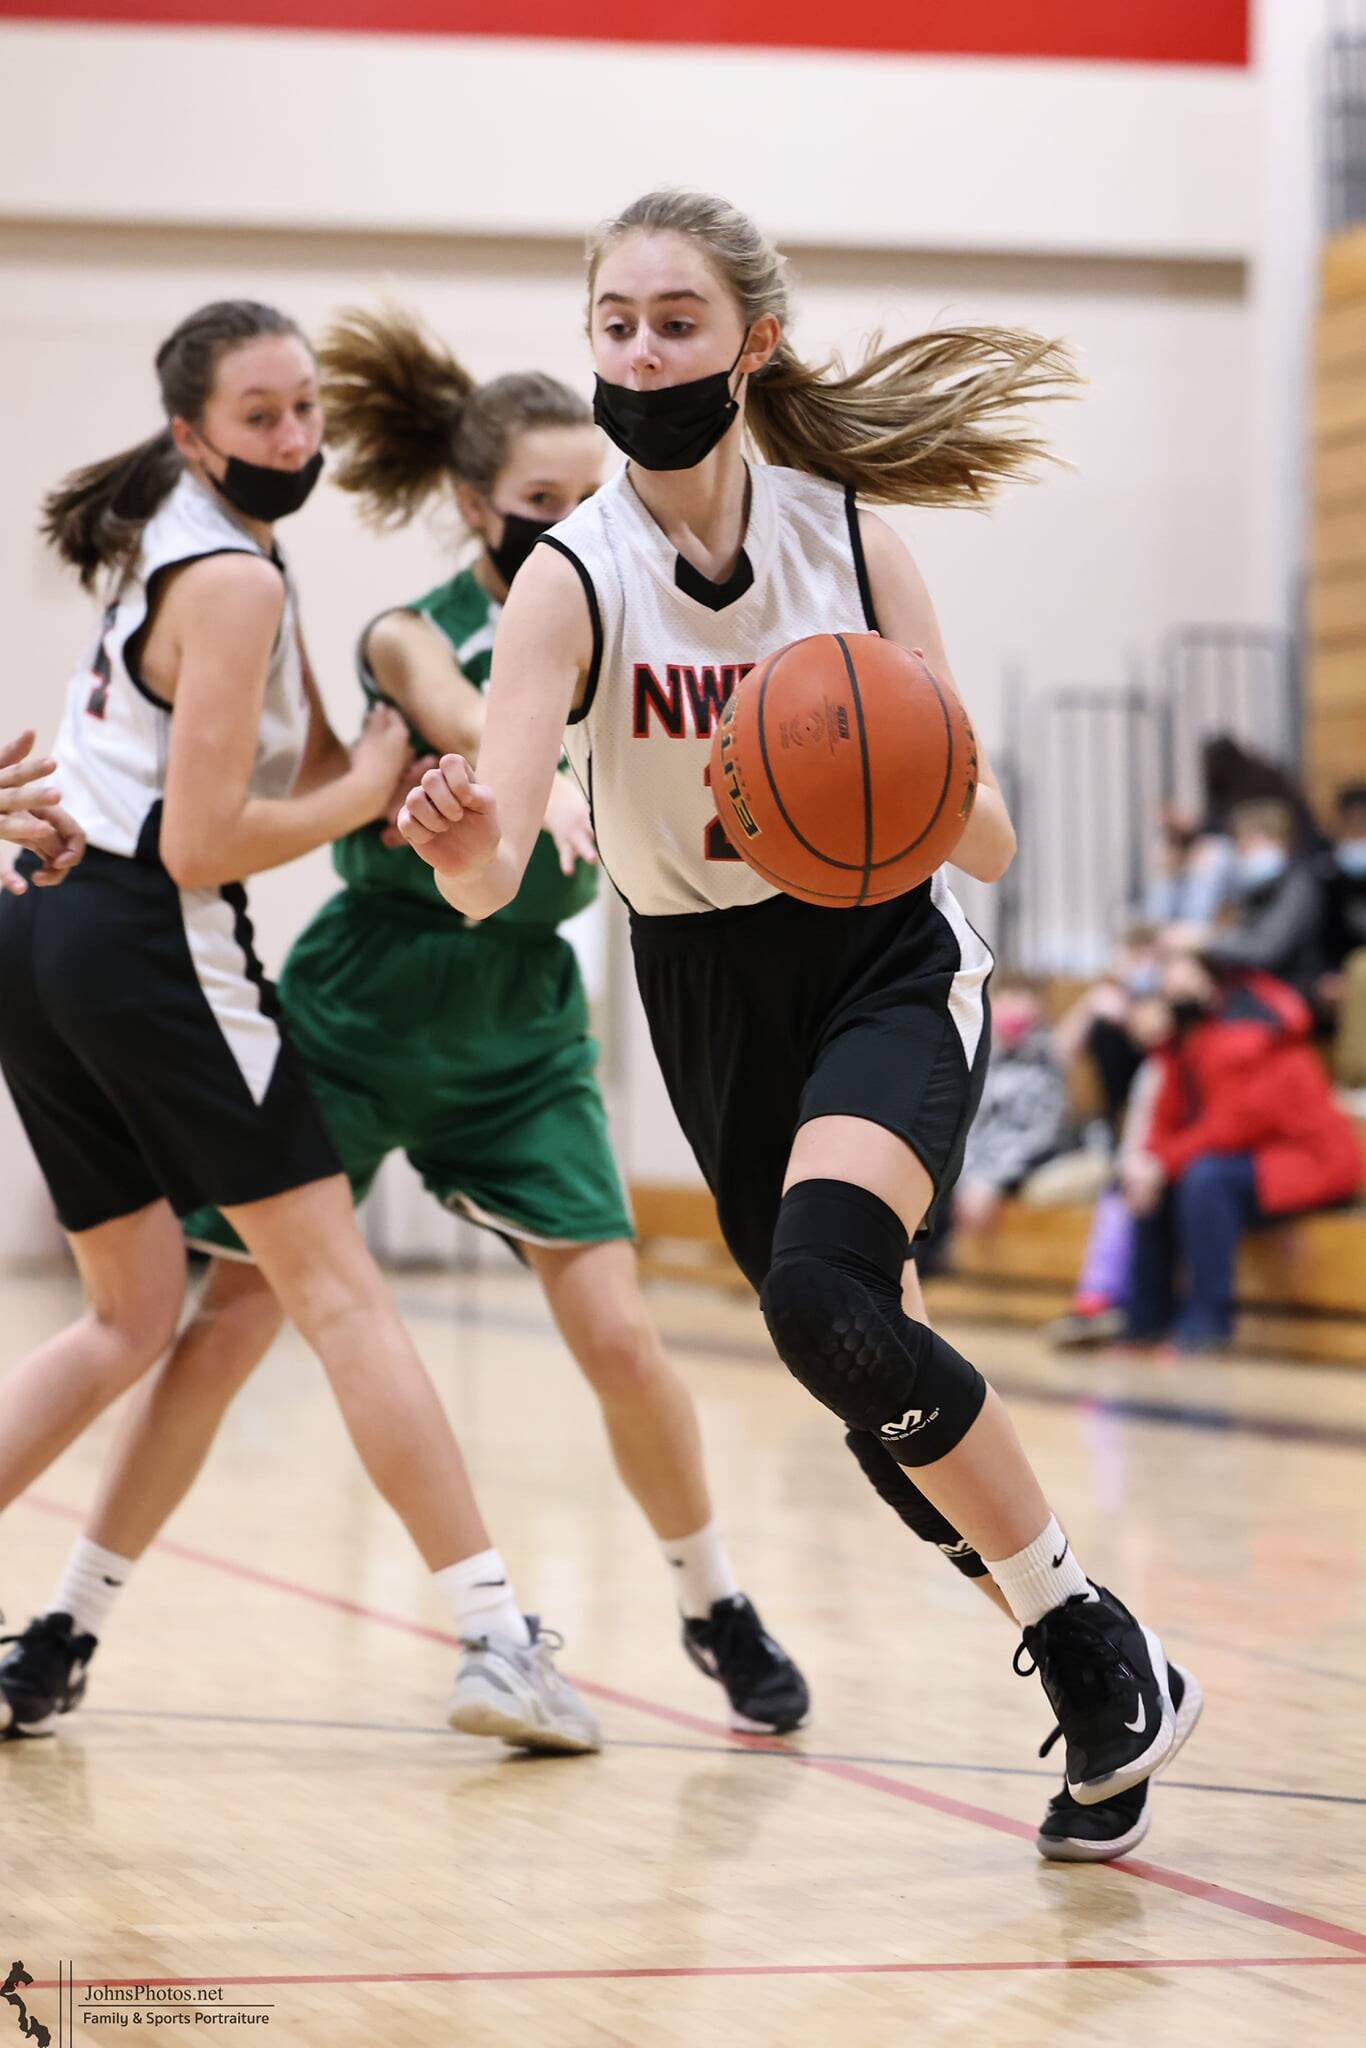 Photo by John Fisken
Scarlett Nations plays with her eighth grade team in a basketball game against LaVenture Middle School, one of eight games the team won handily for an undefeated season.